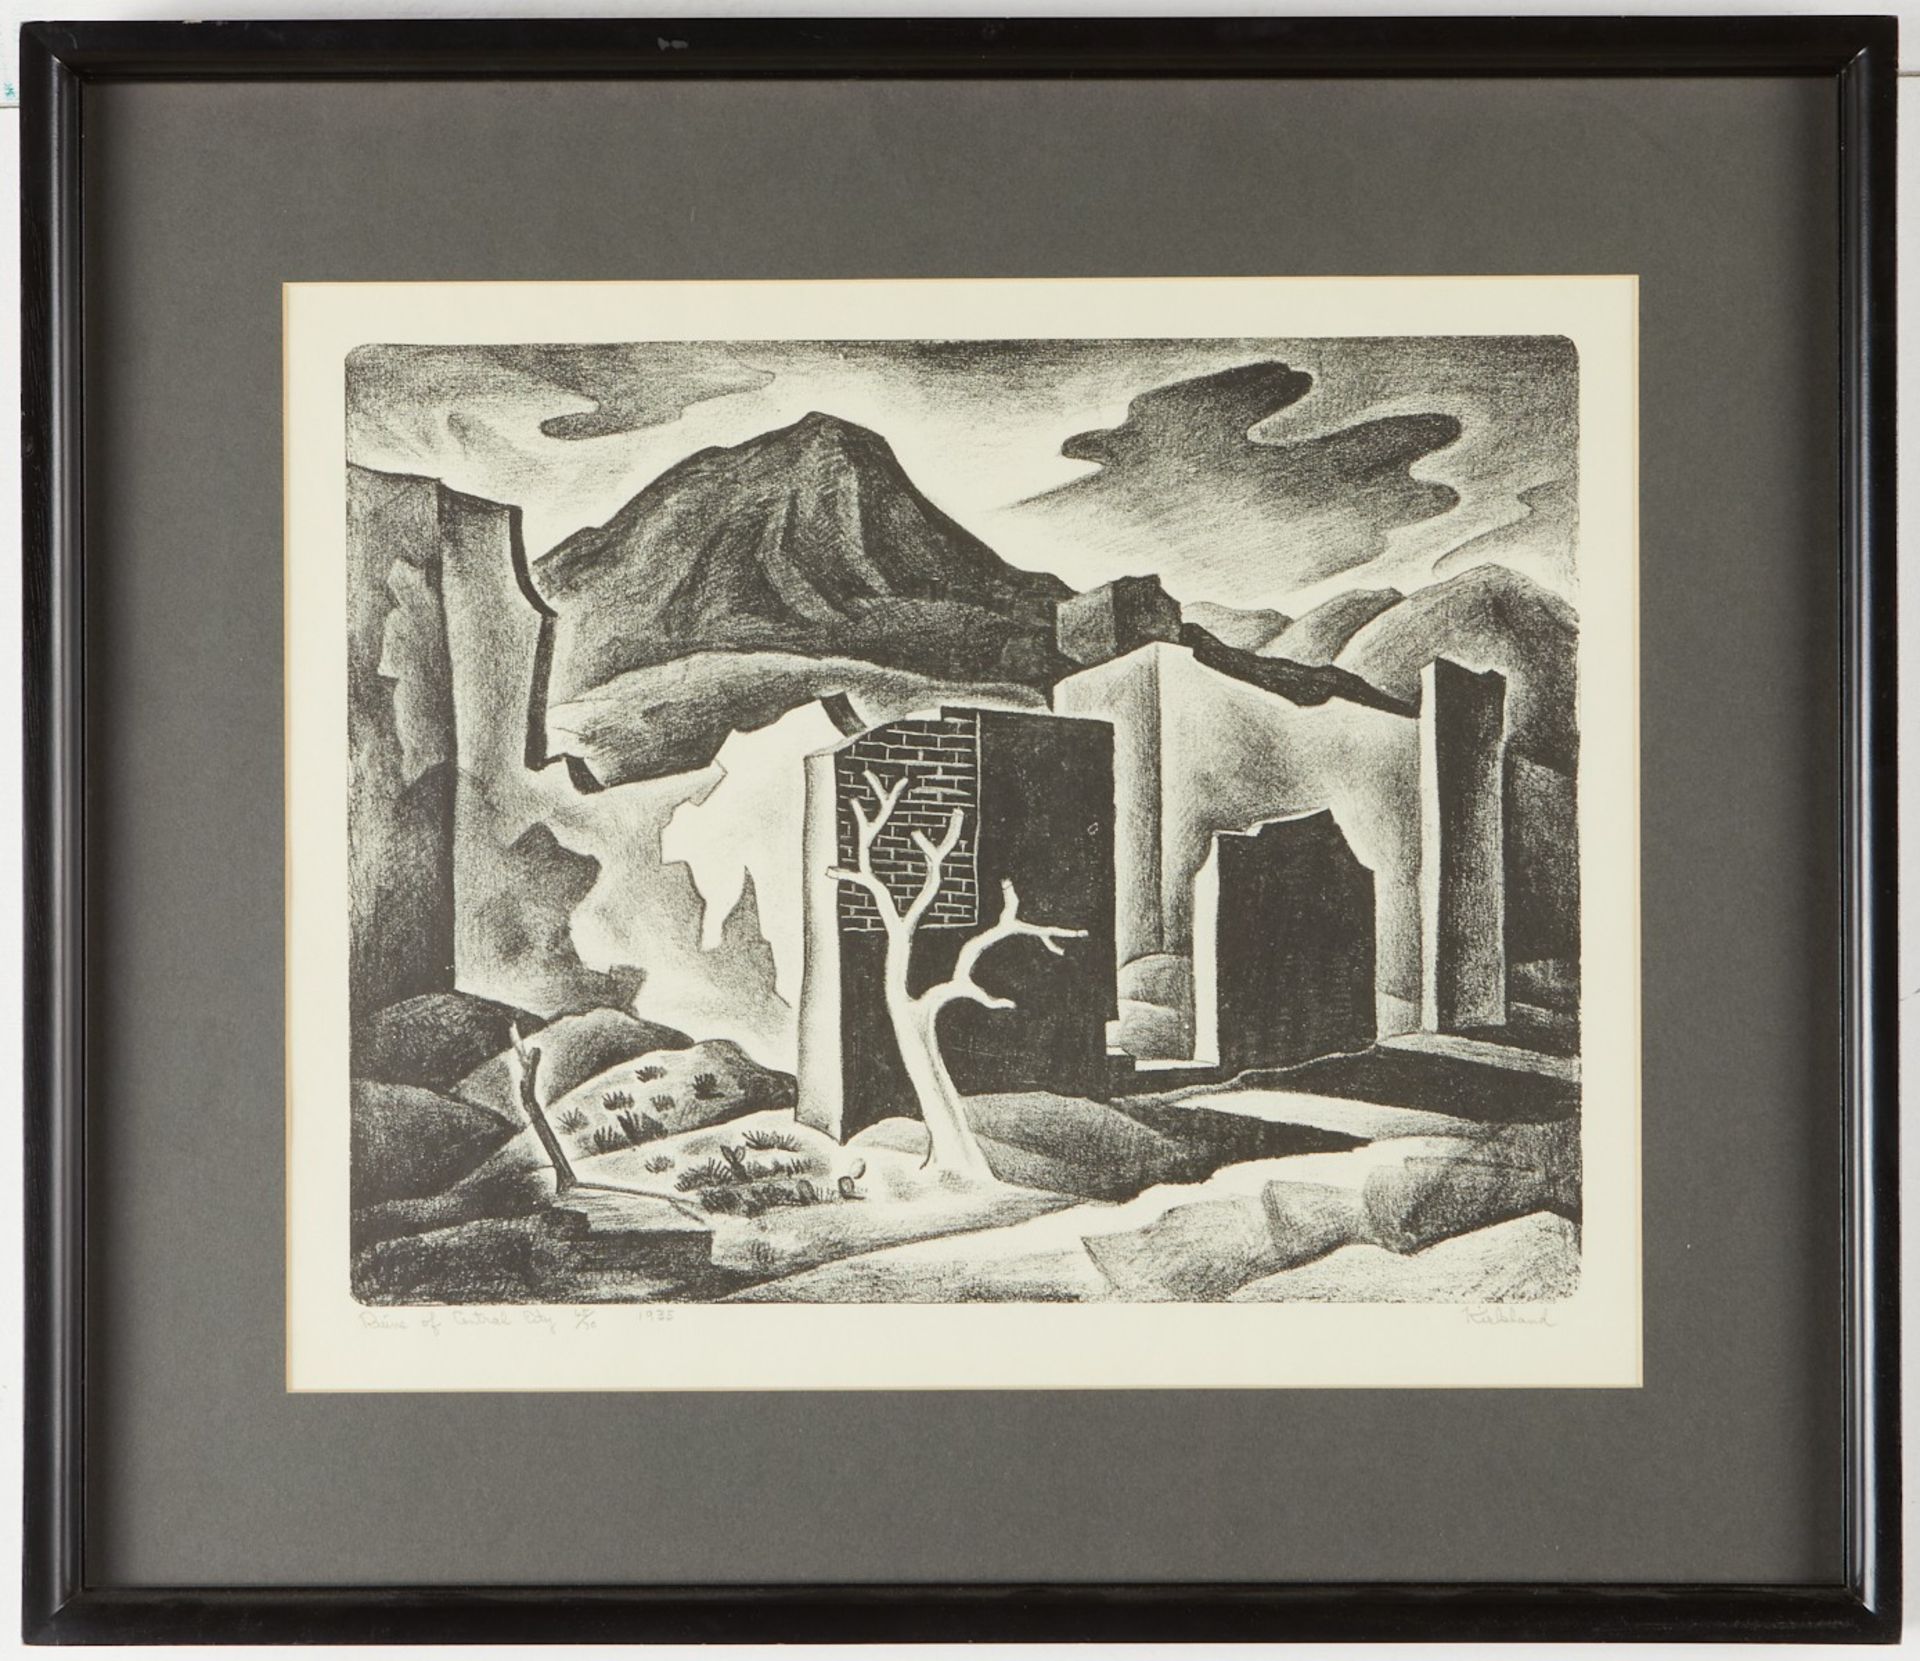 Vance Kirkland "Ruins of Central City" Lithograph - Image 2 of 4